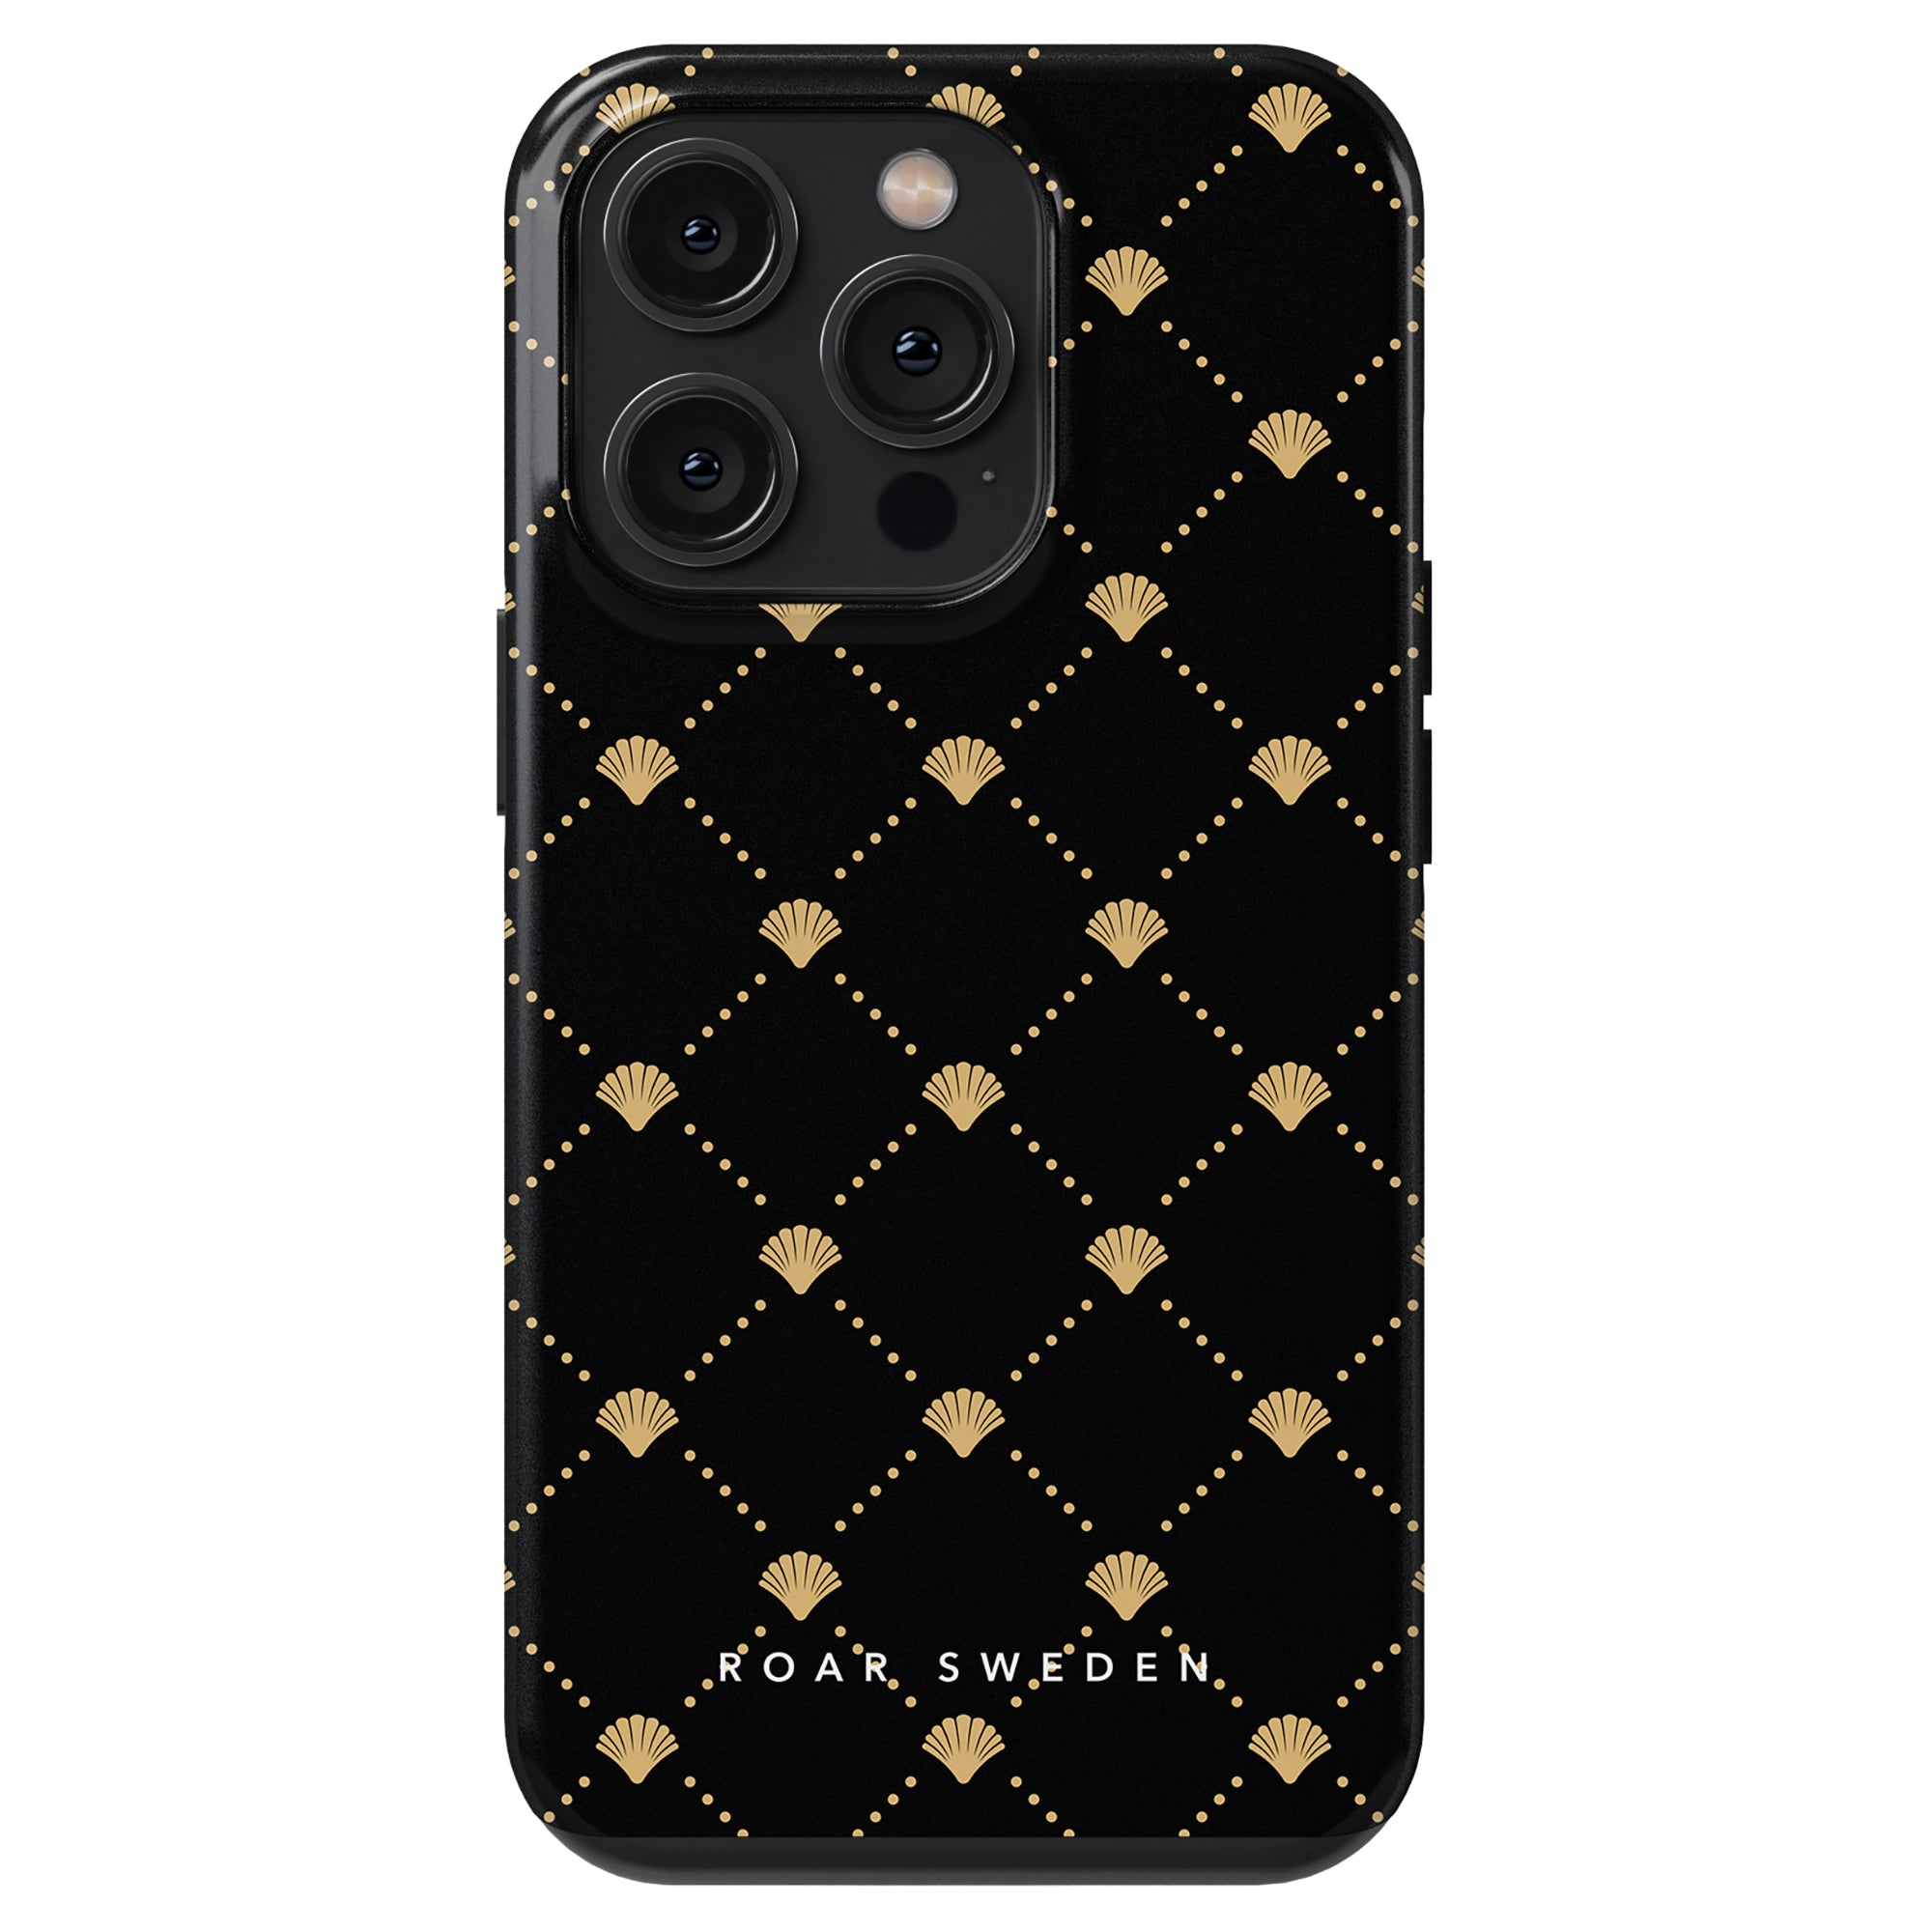 Luxe Shells Black - Tough Case with a gold-patterned design from the Ocean Collection and the text "ROAR SWEDEN" at the bottom.